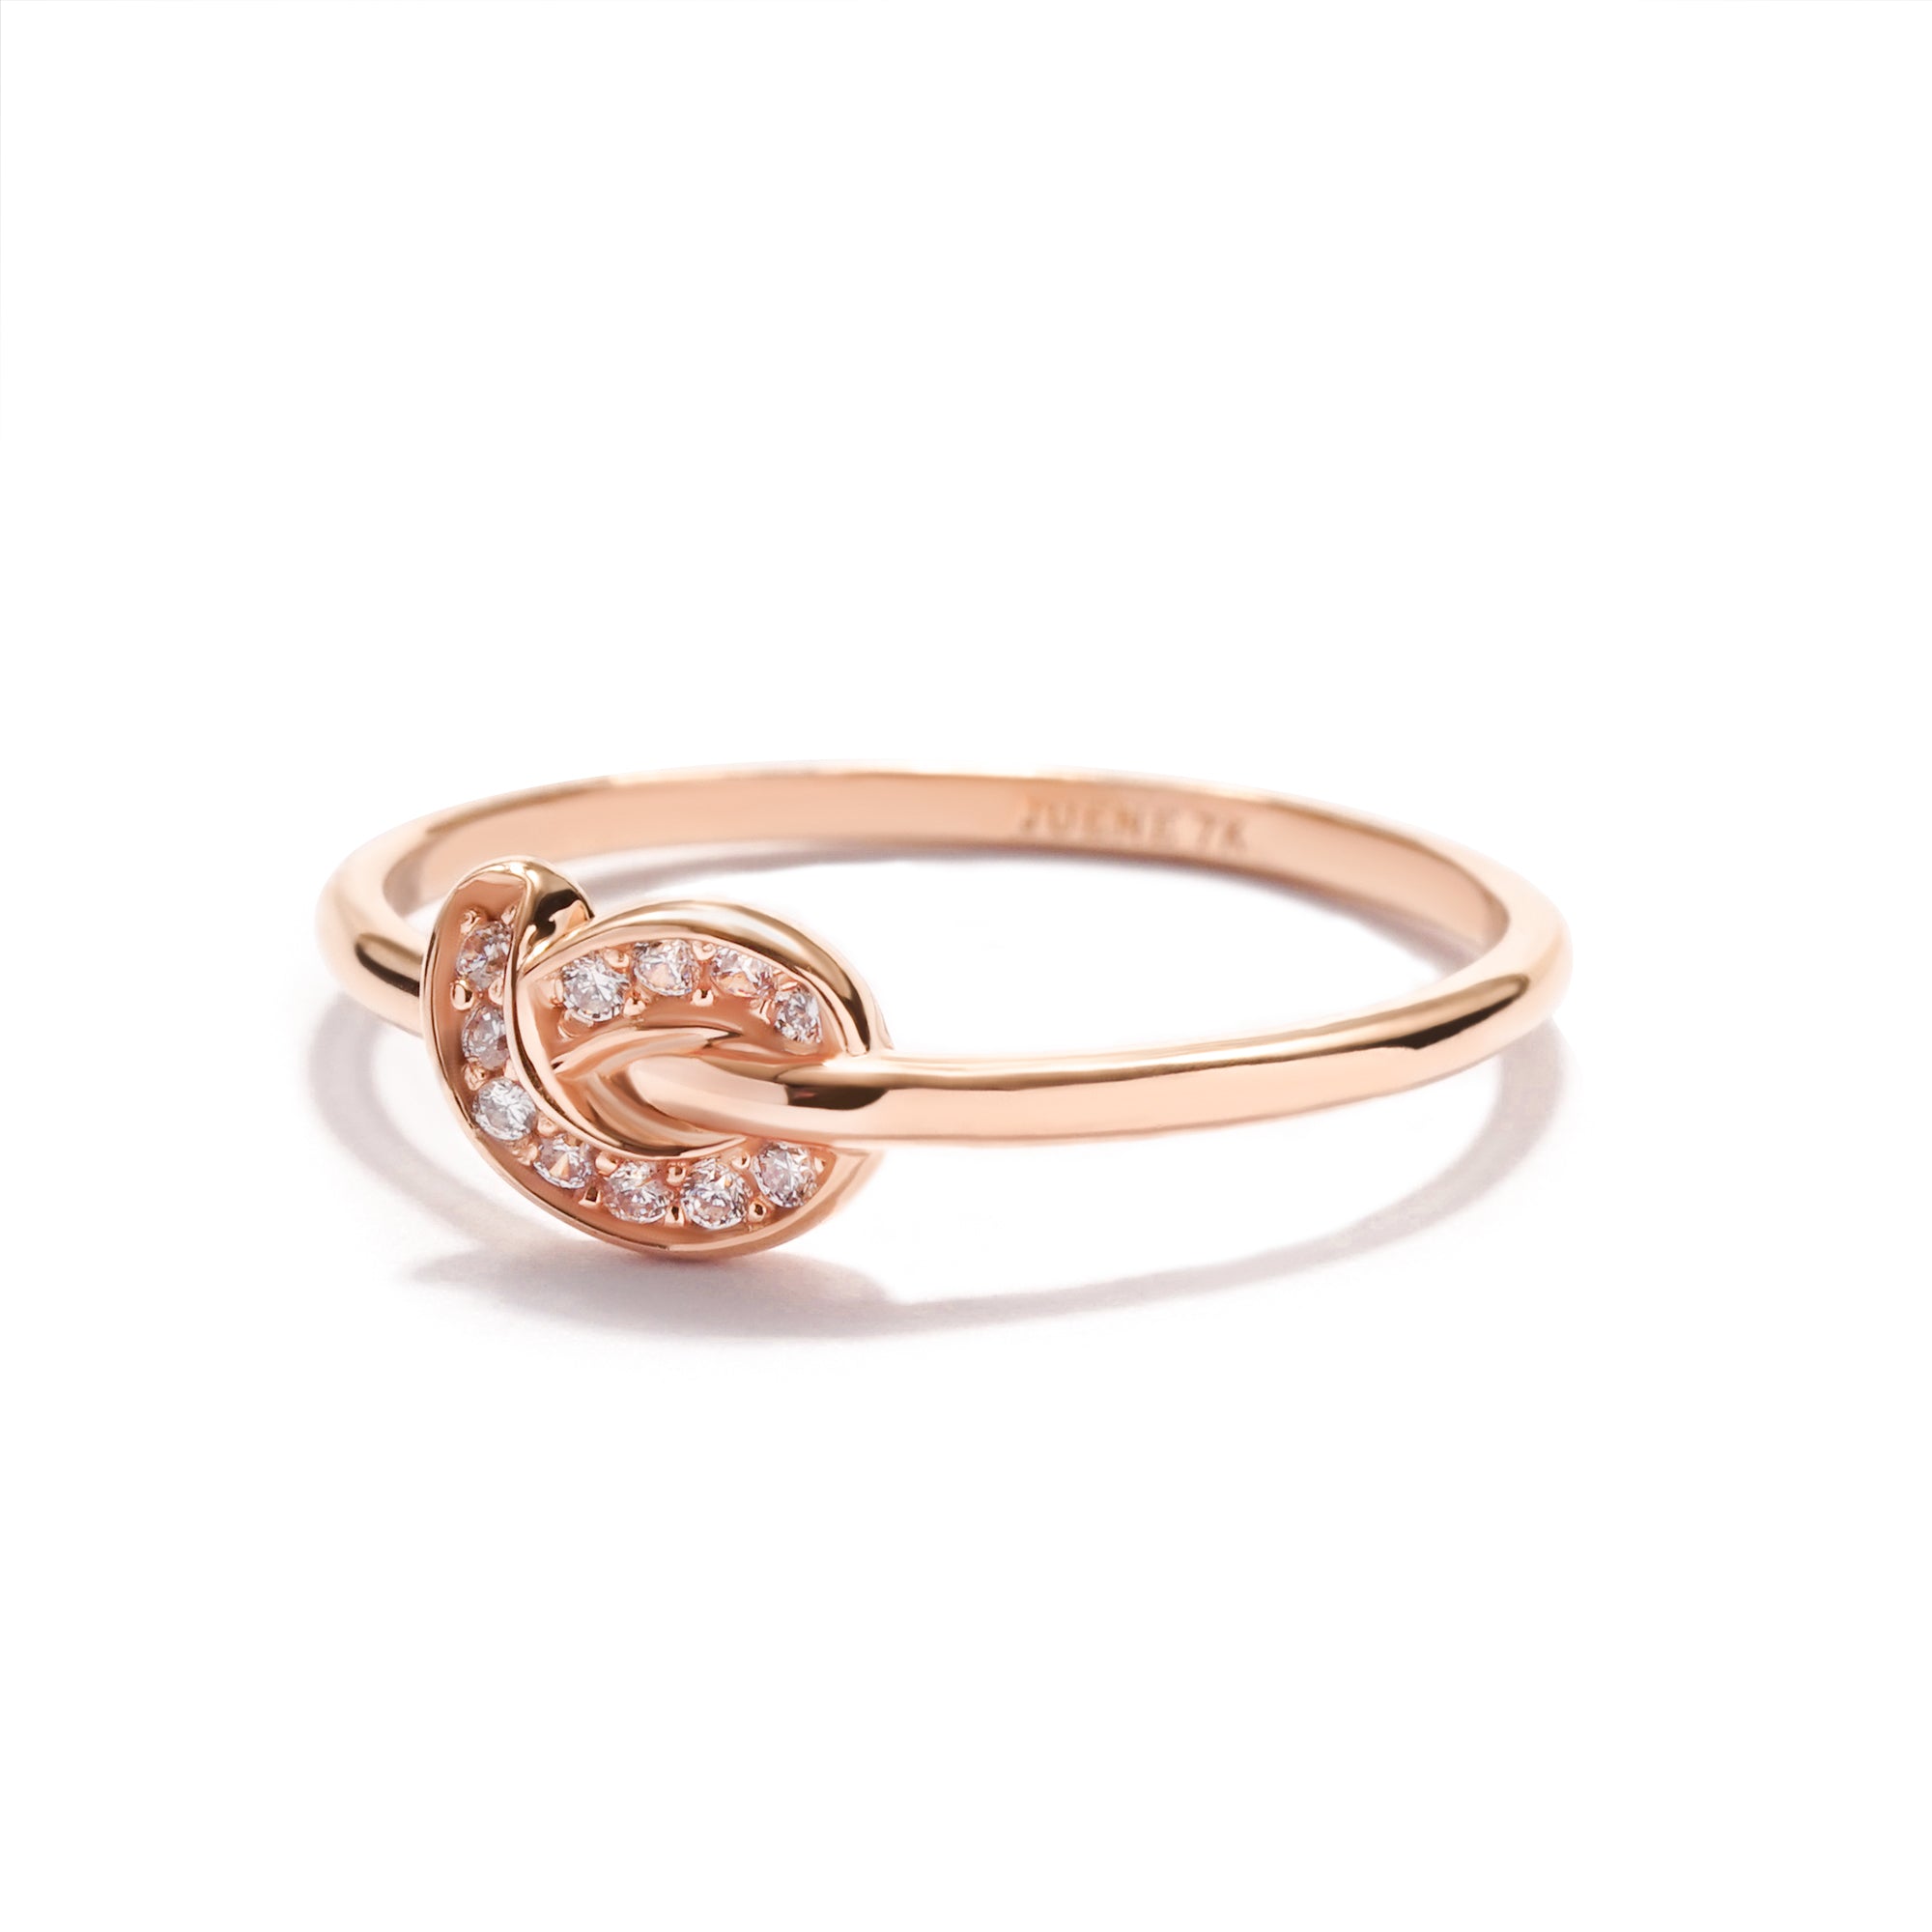 Loop Gold Ring - Twine Collection - Juene Jewelry